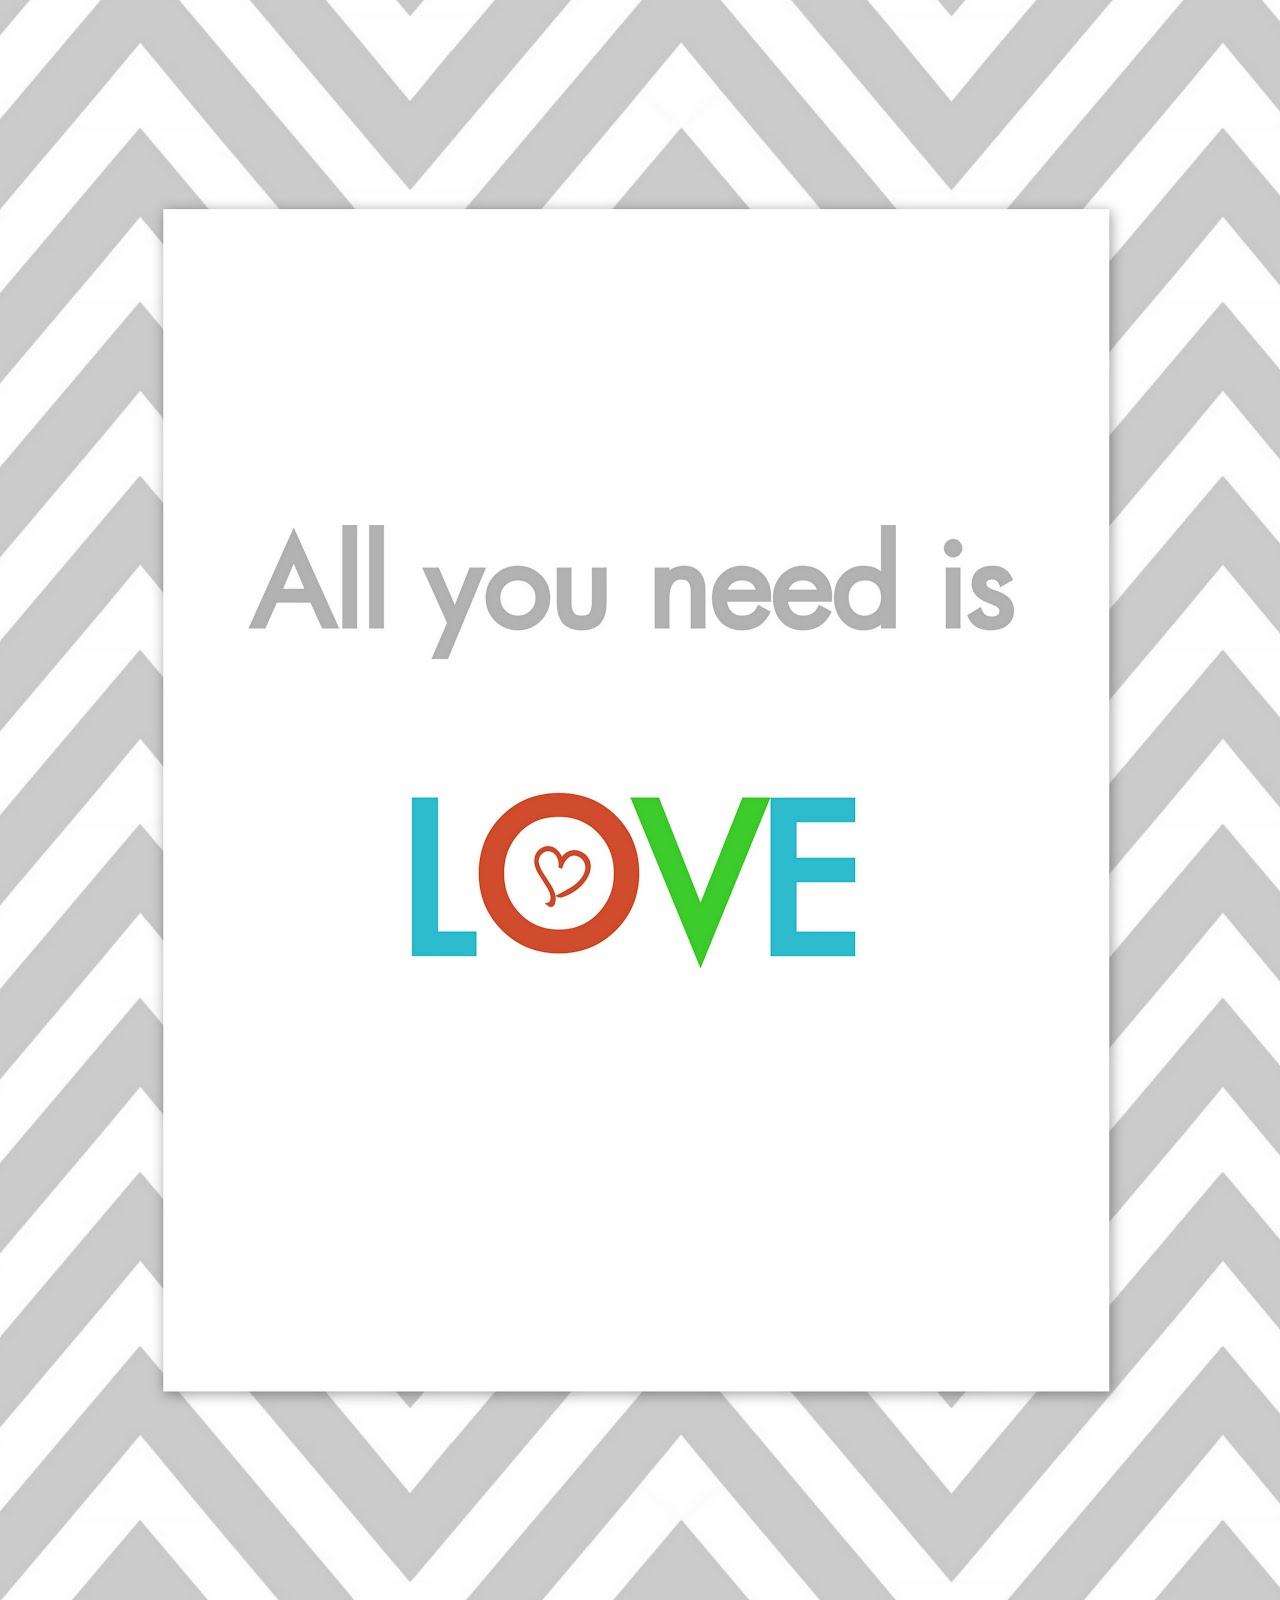 No time to be bored: All you need is love - free printable